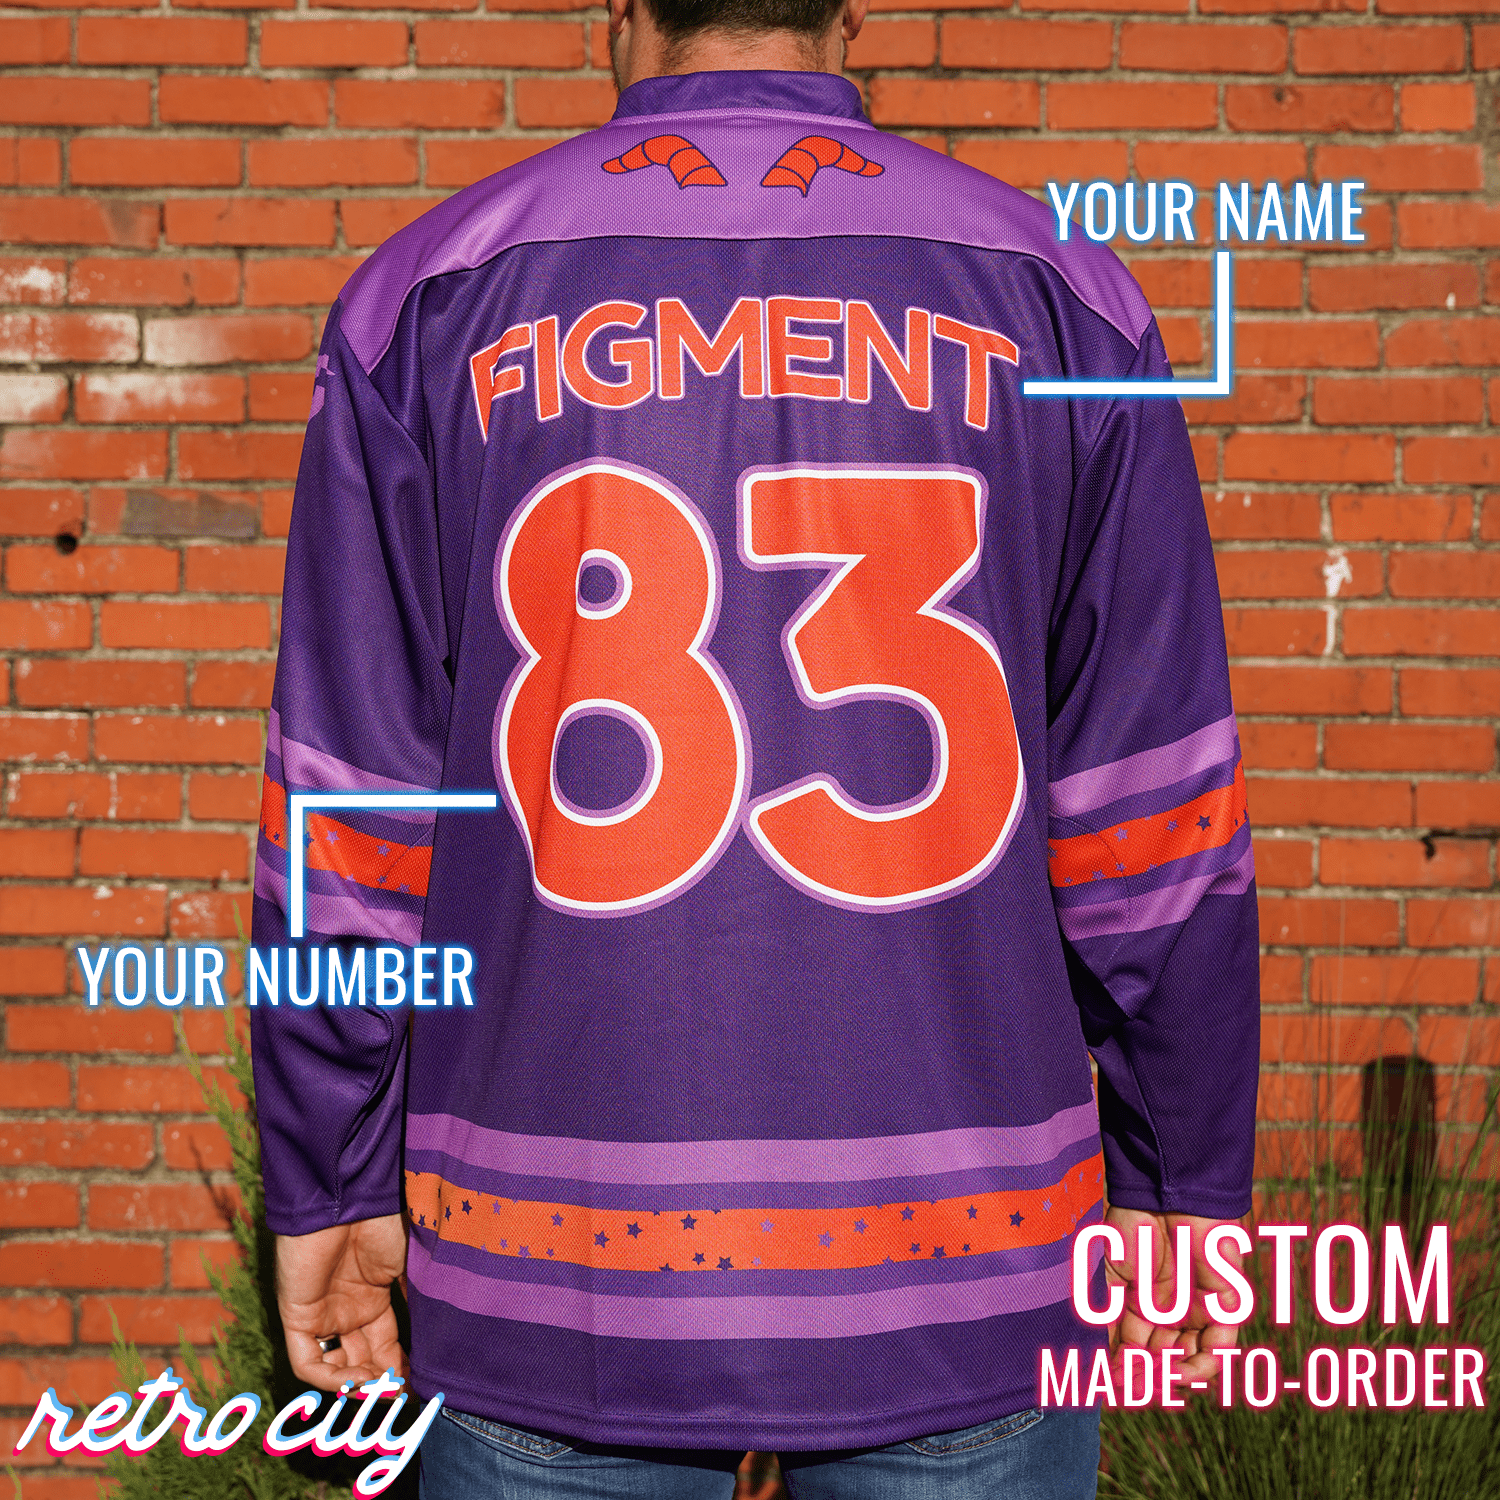 Dreamfinders Lace-up Hockey Jersey Sweater